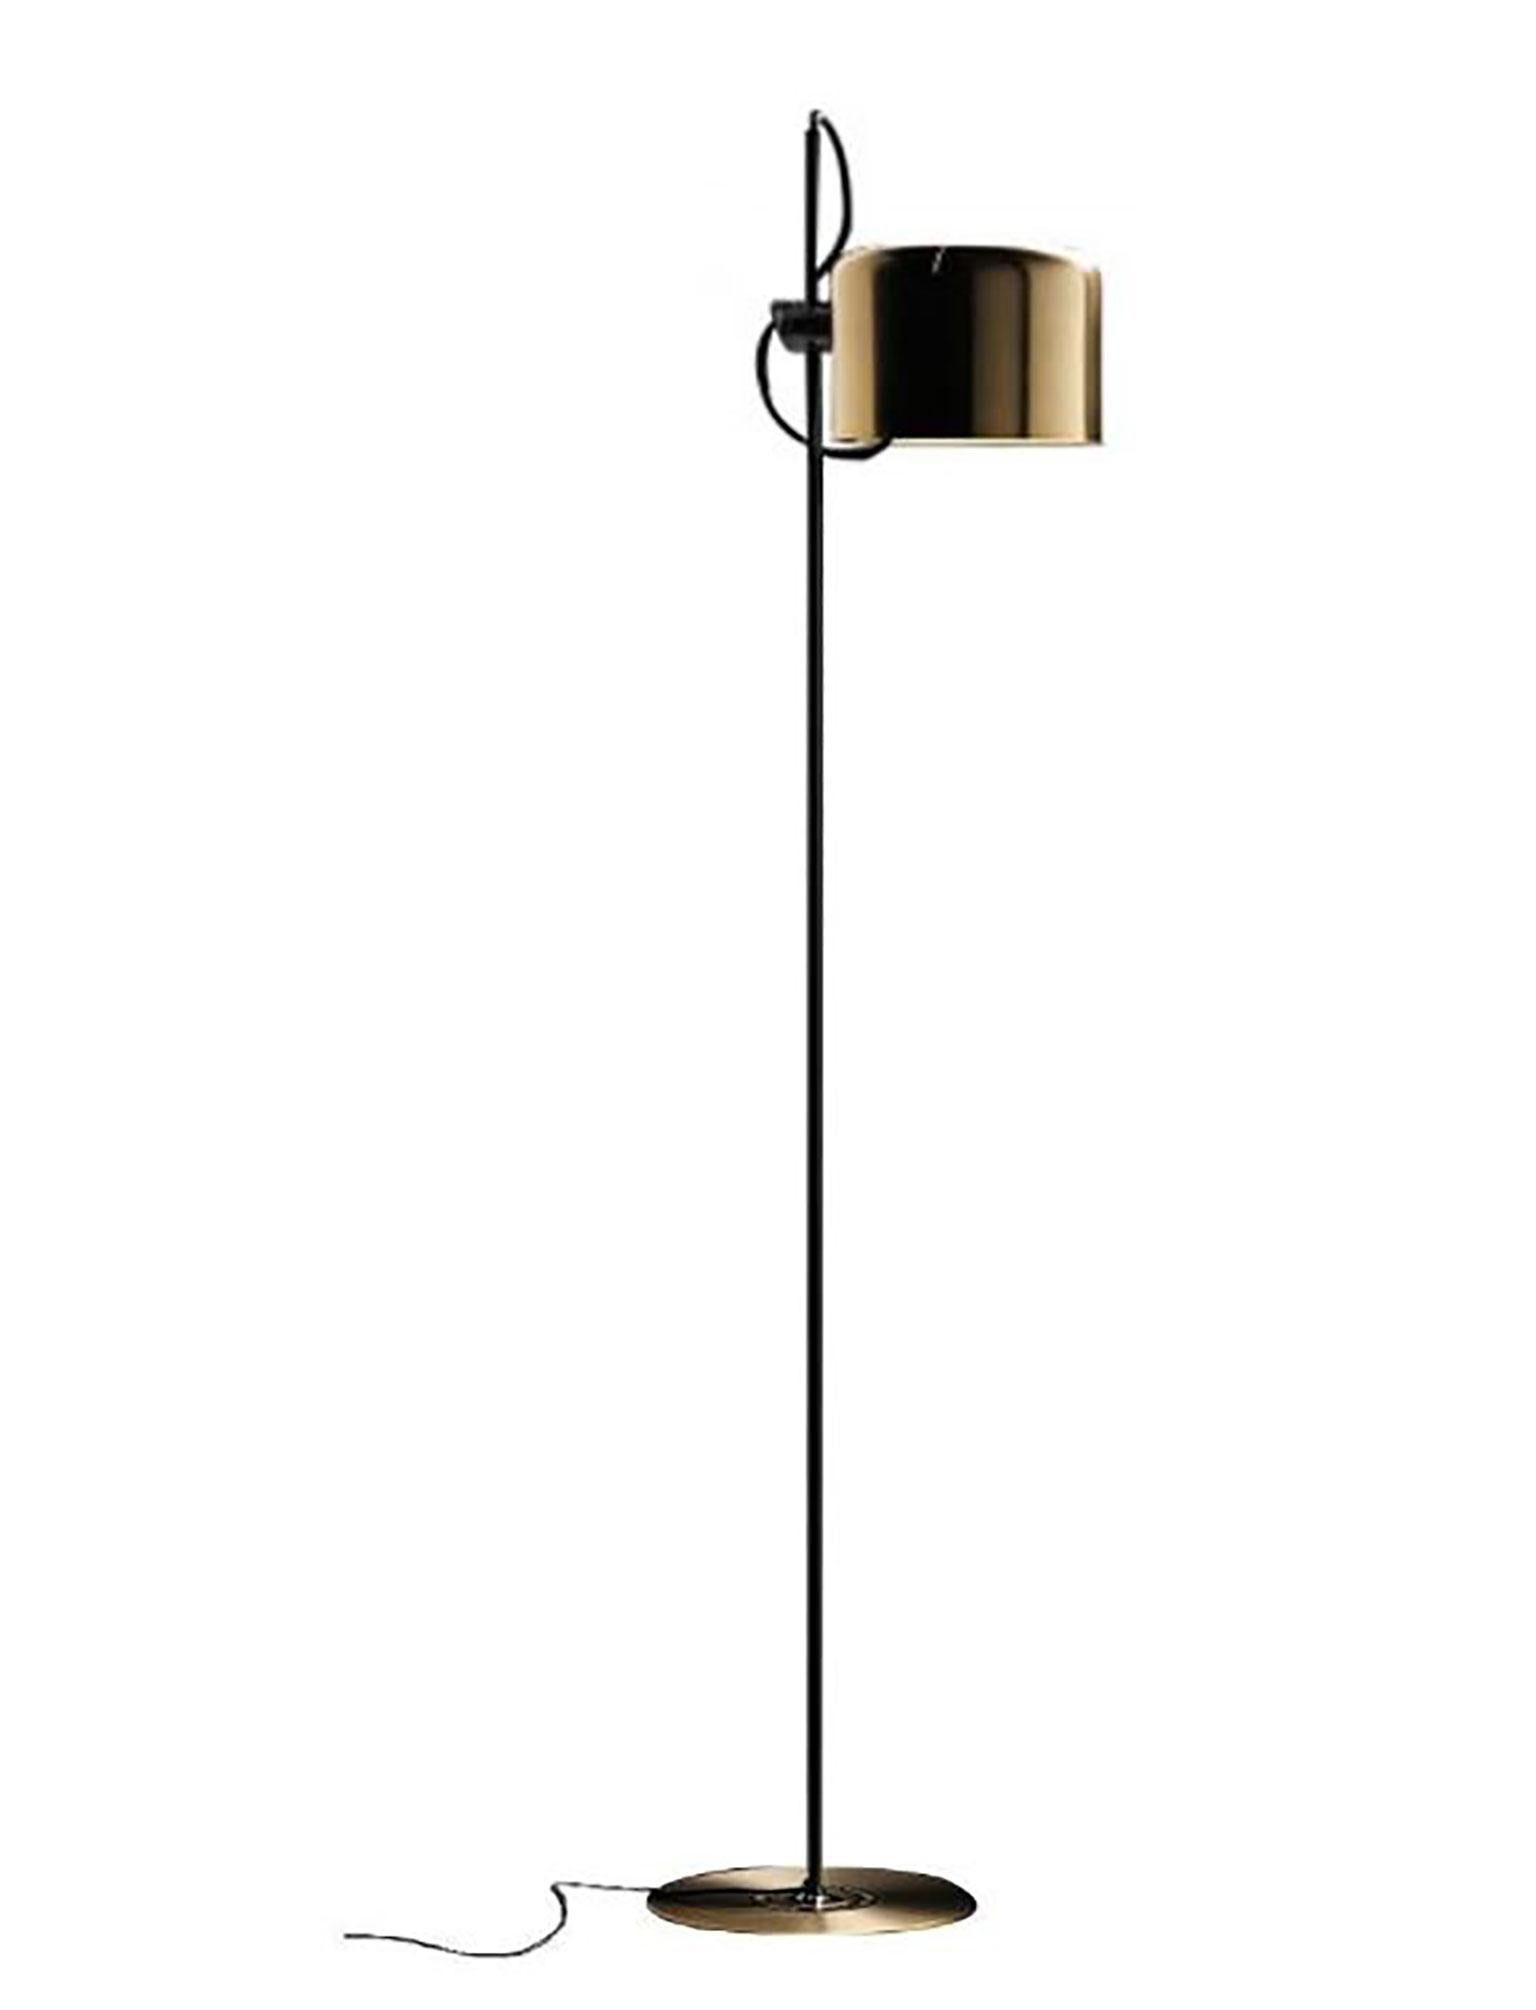 Coupe floor lamp (3321) designed by Joe Colombo for Oluce. The Coupe series of lamps is considered as a variation of the spider lamps. This lamp has a base that is made of lacquered metal with a reflector in the shape of semi-cylindrical shape in a